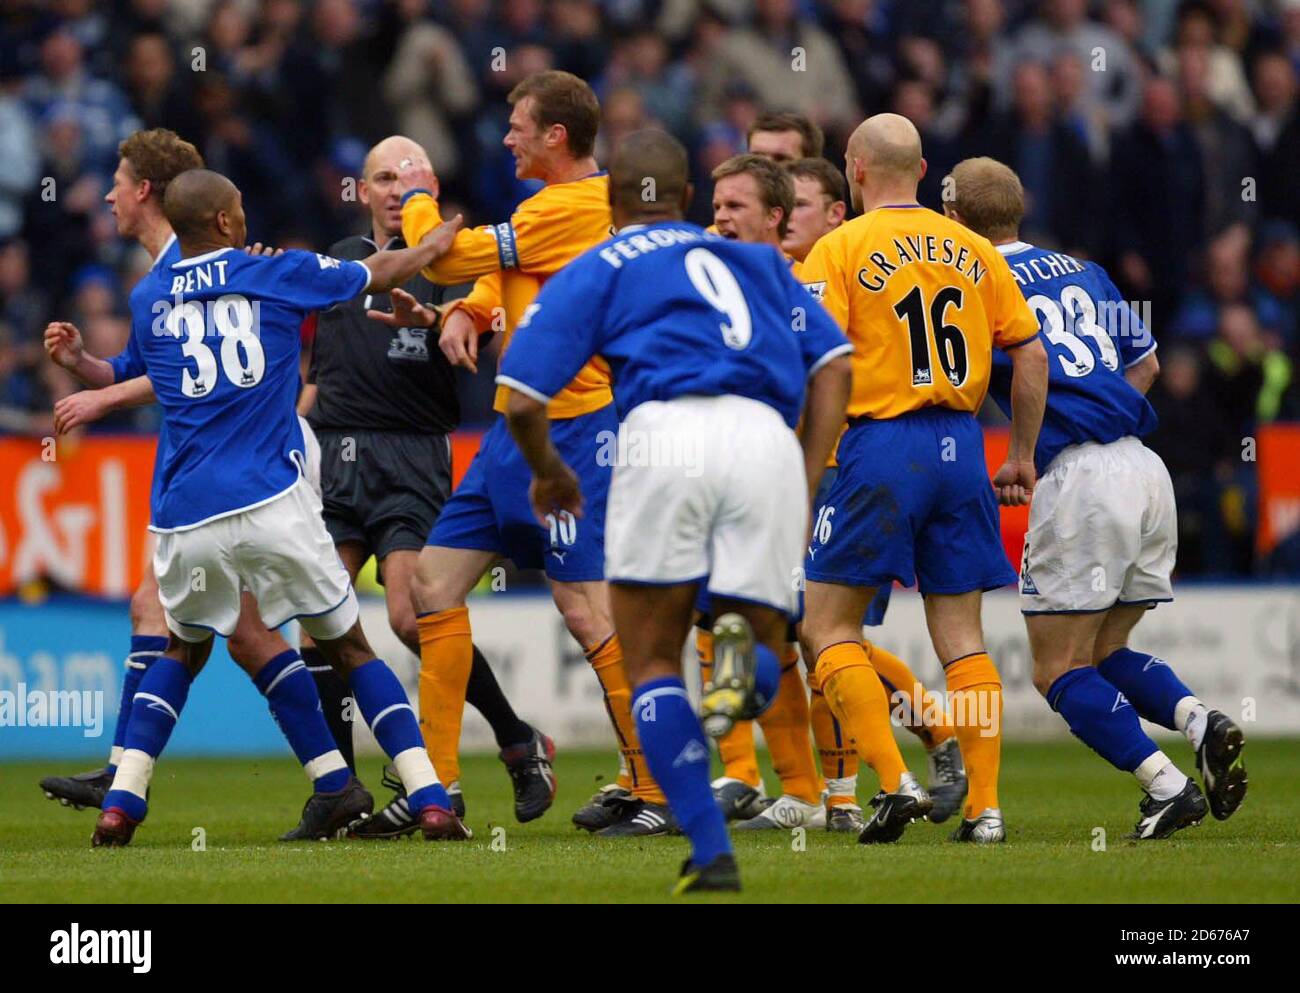 Everton's Duncan Ferguson lashes at Leicester City's Freund after being shown a red card Stock Photo - Alamy